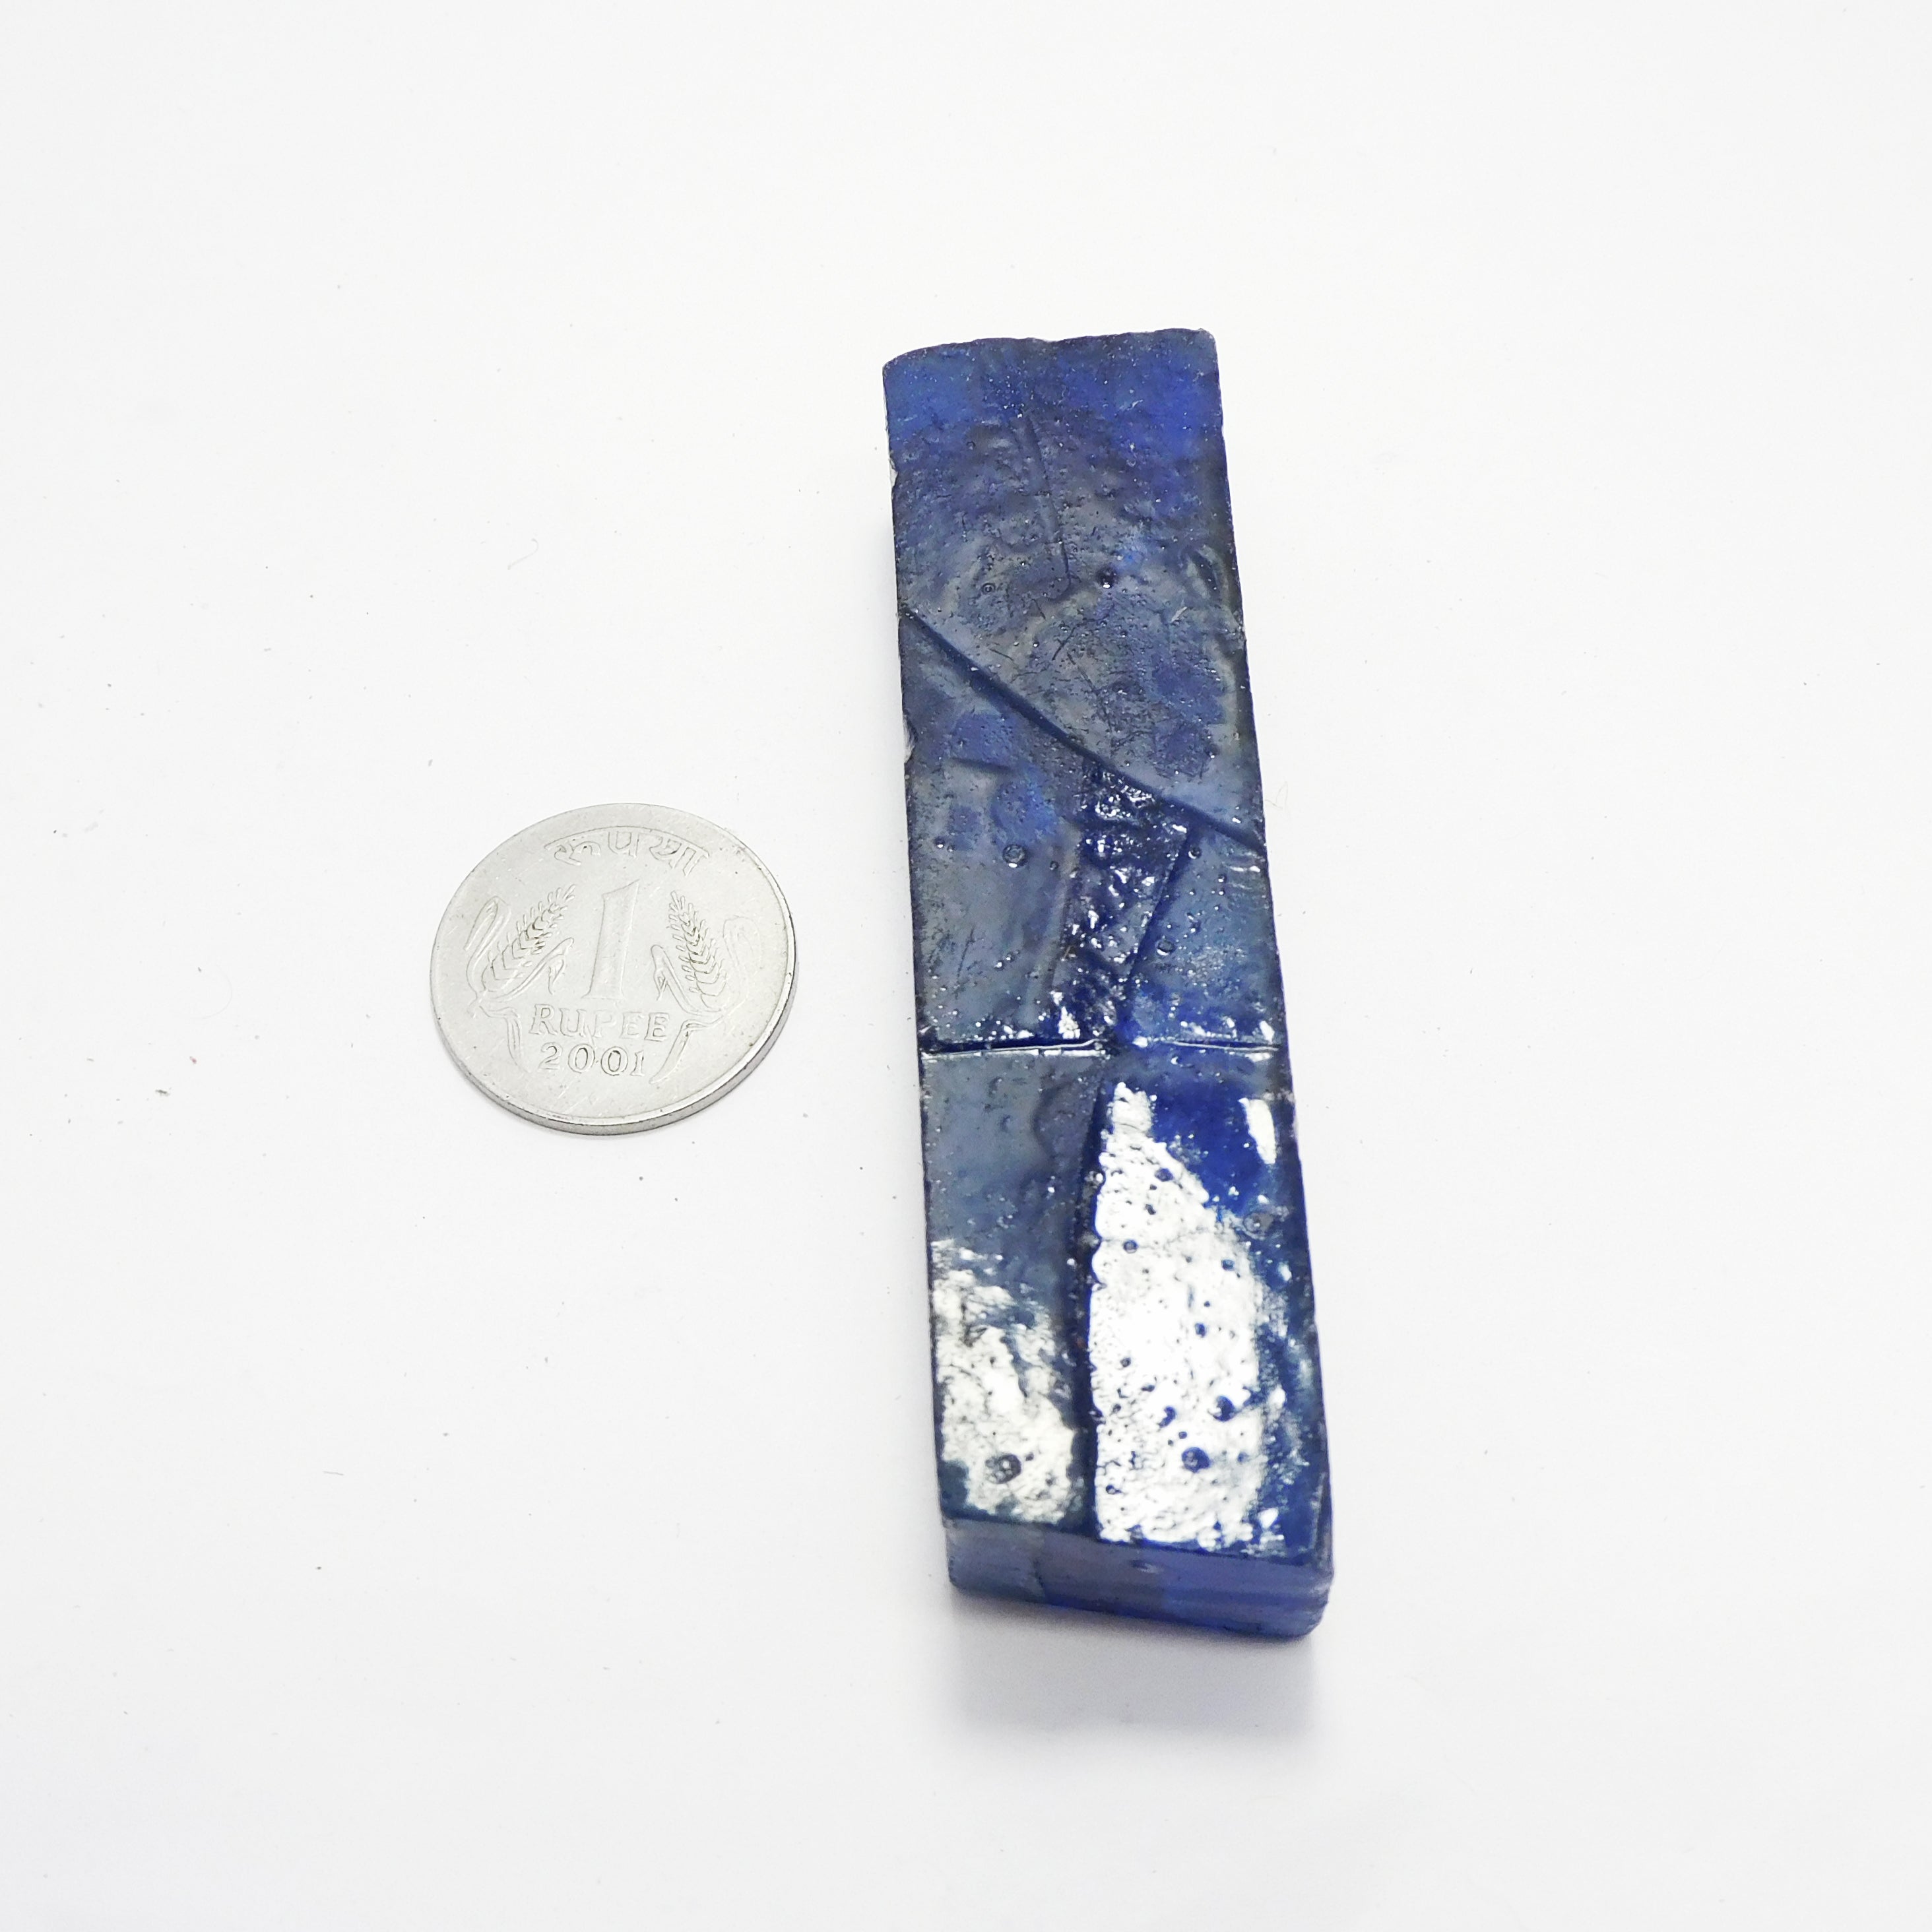 Uncut Raw Rough 469.55 Carat Natural Blue Sapphire Certified Loose Gemstone | Best For Ethically Sourced | On Price